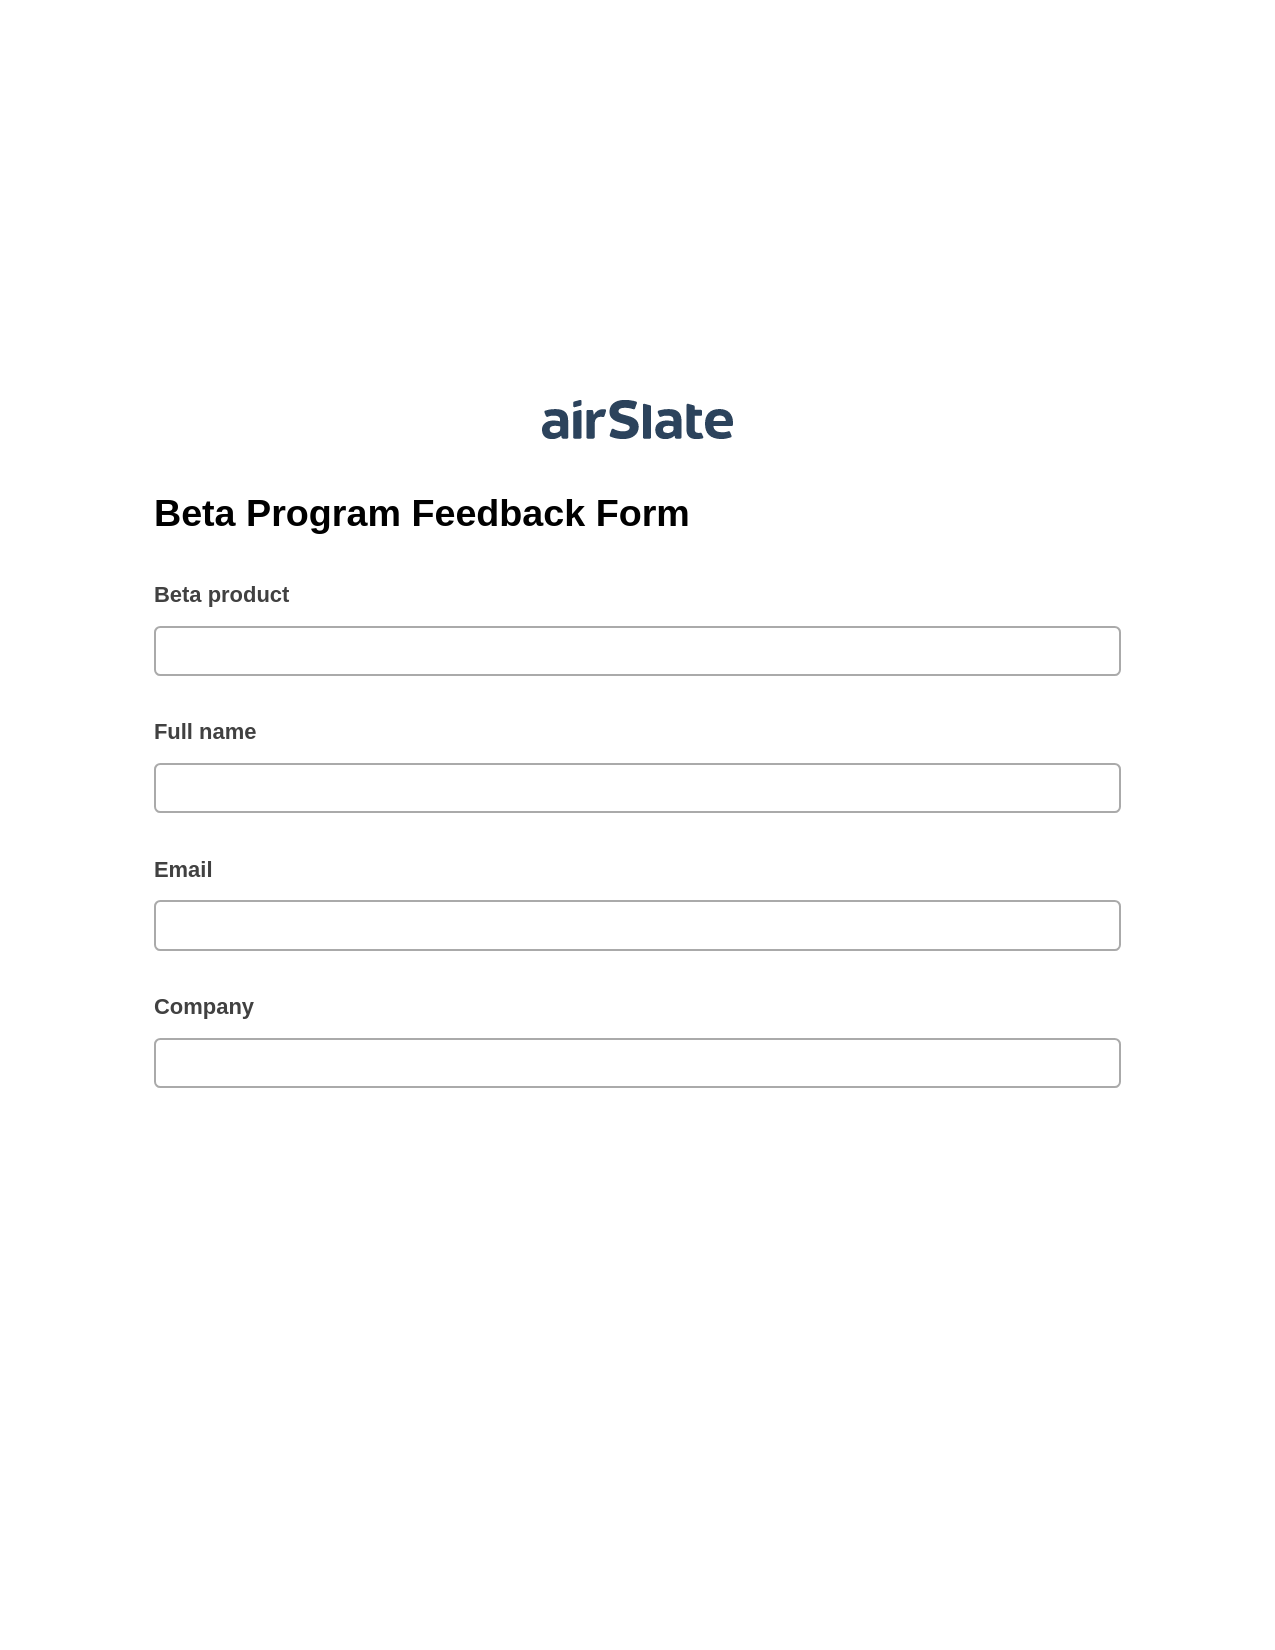 Beta Program Feedback Form Pre-fill Dropdowns from Excel Bot, Hide Signatures Bot, Export to NetSuite Record Bot